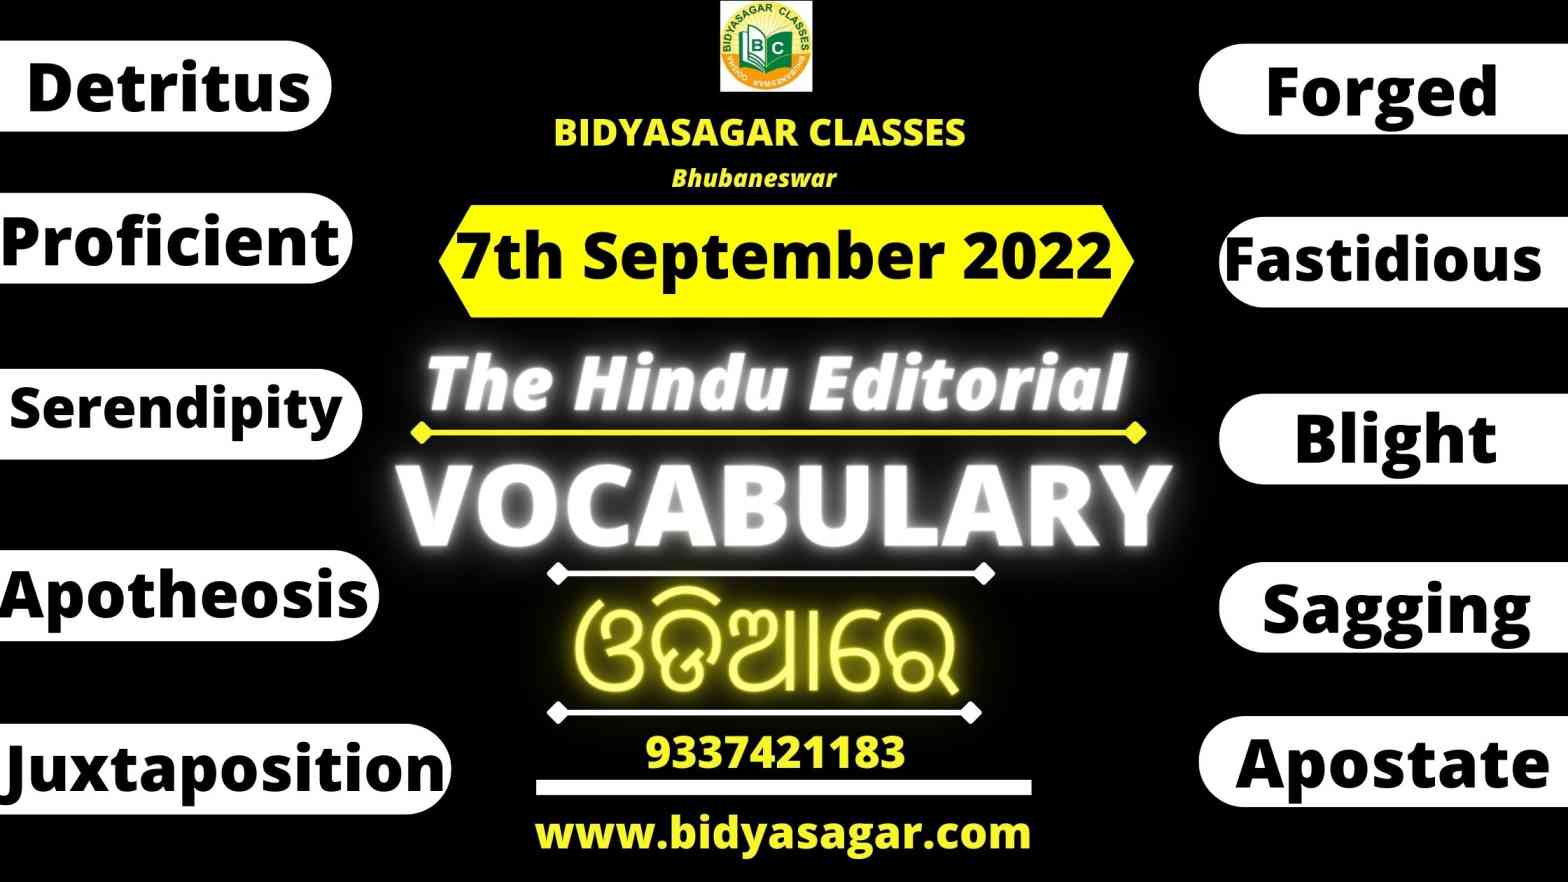 The Hindu Editorial Vocabulary of 7th September 2022